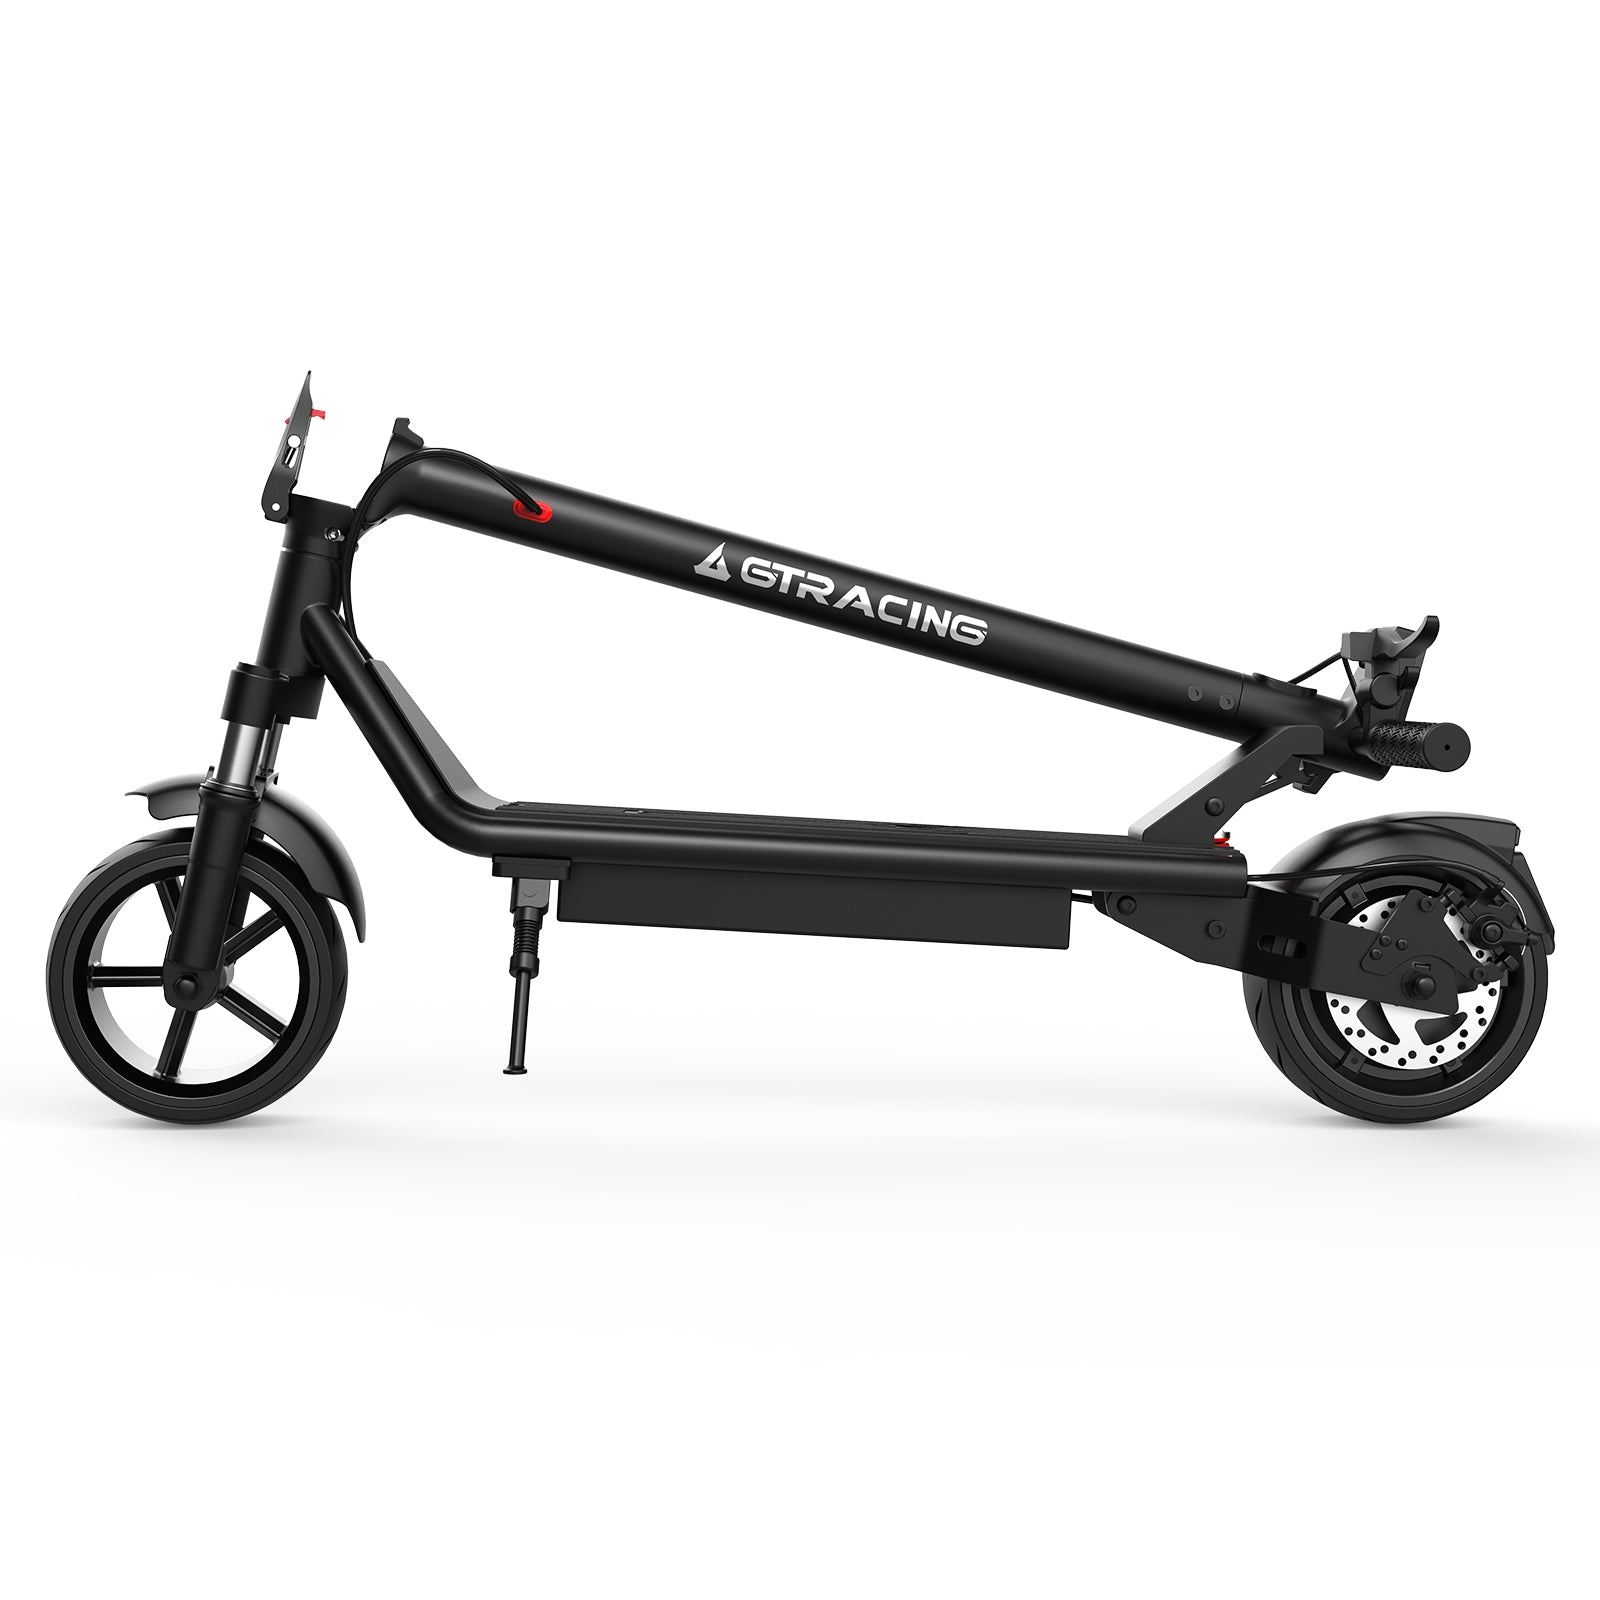 Off-Road Series X9 Electric scooter - GTRACING